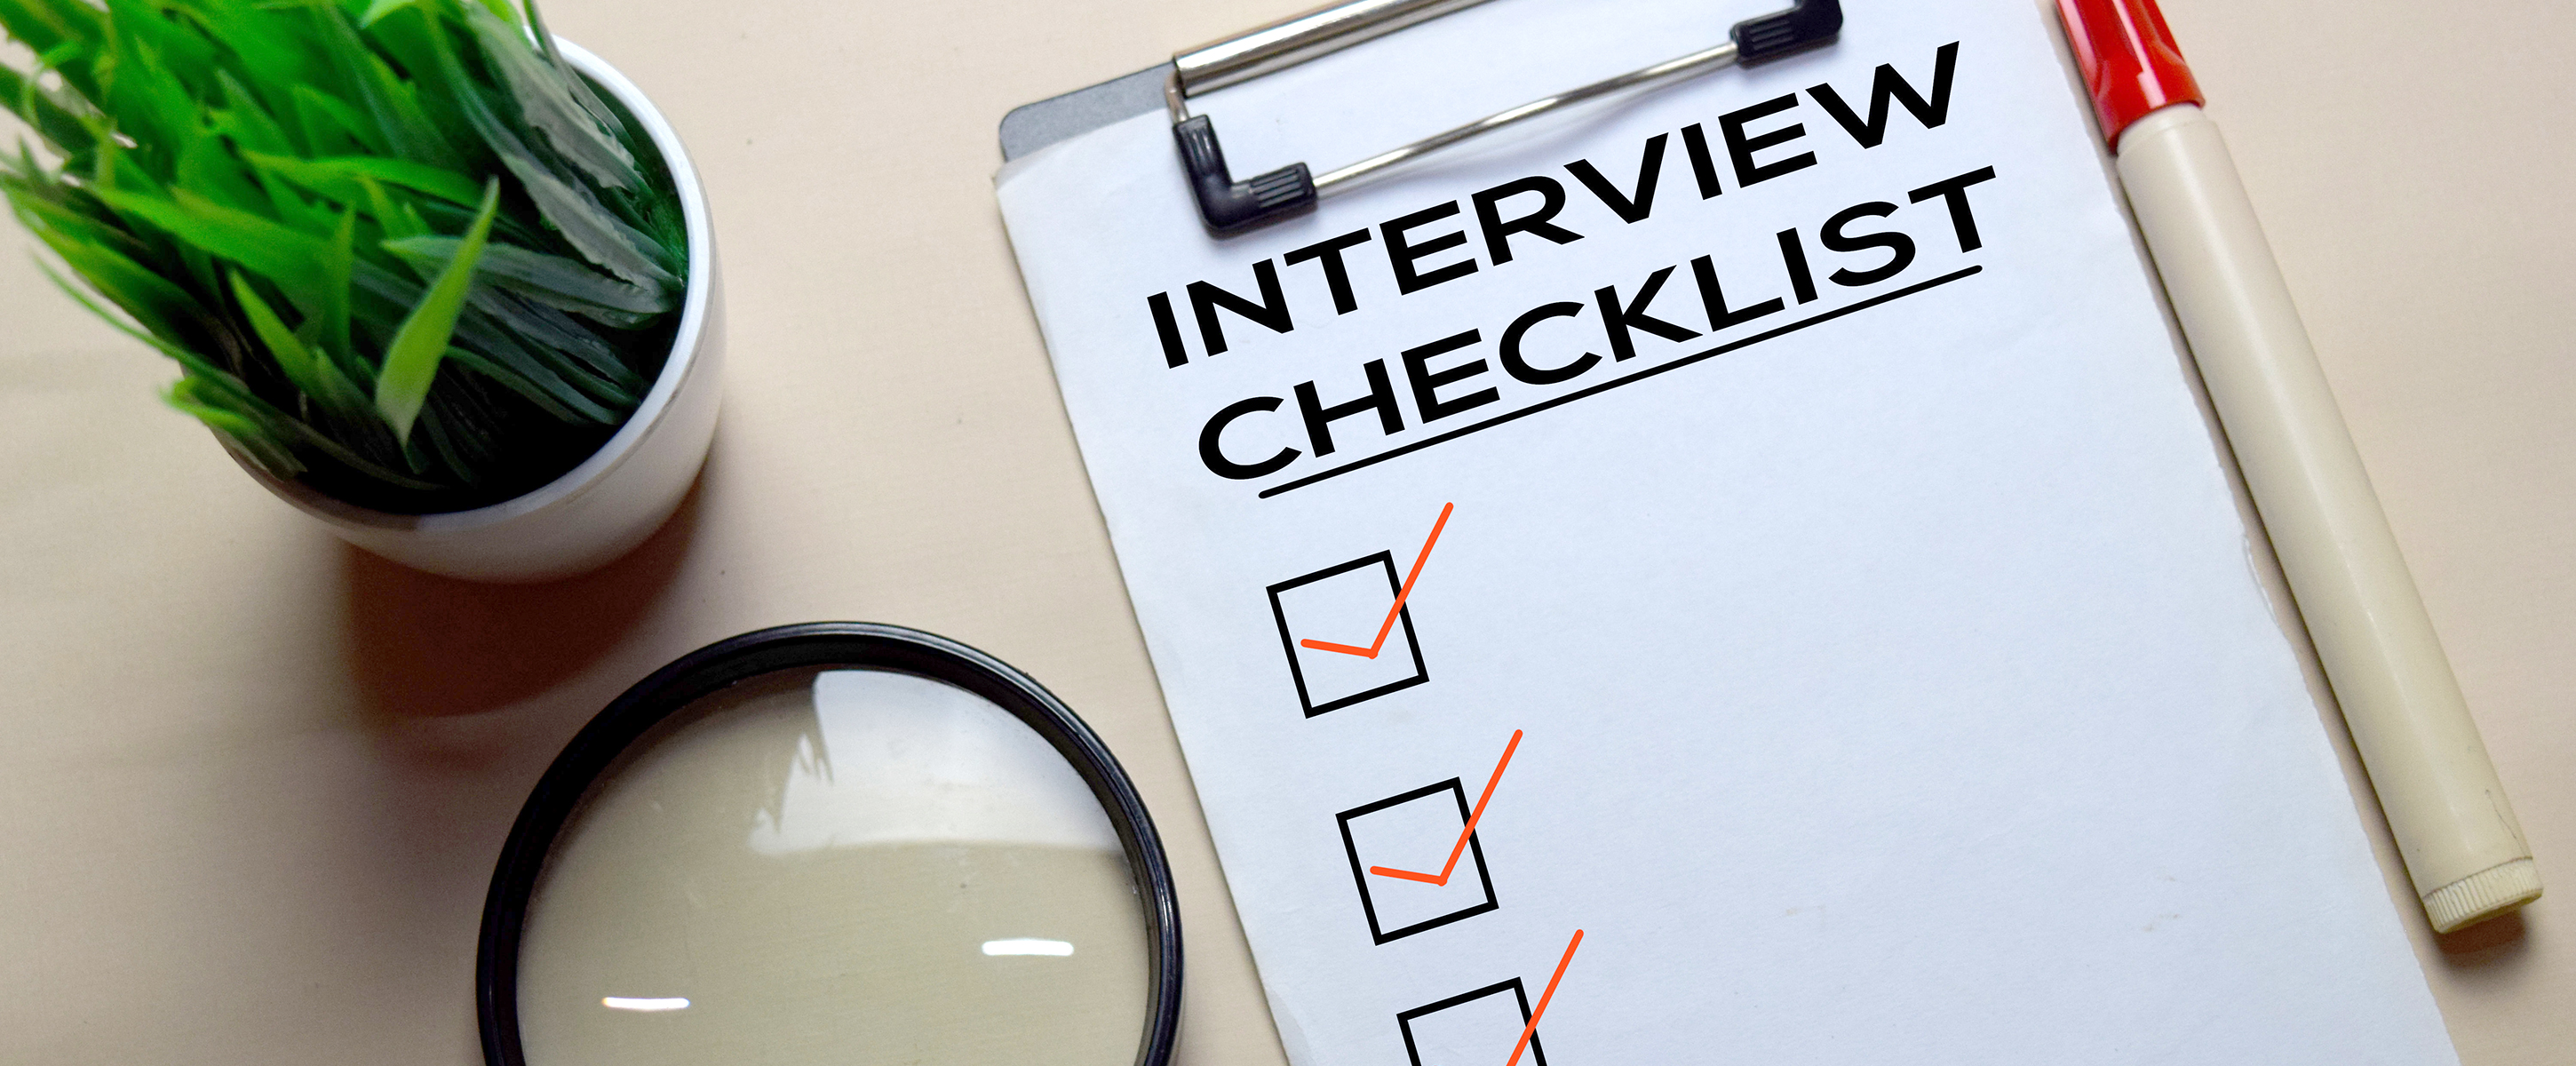 Interview Checlist write on a paperwork isolated on office desk.